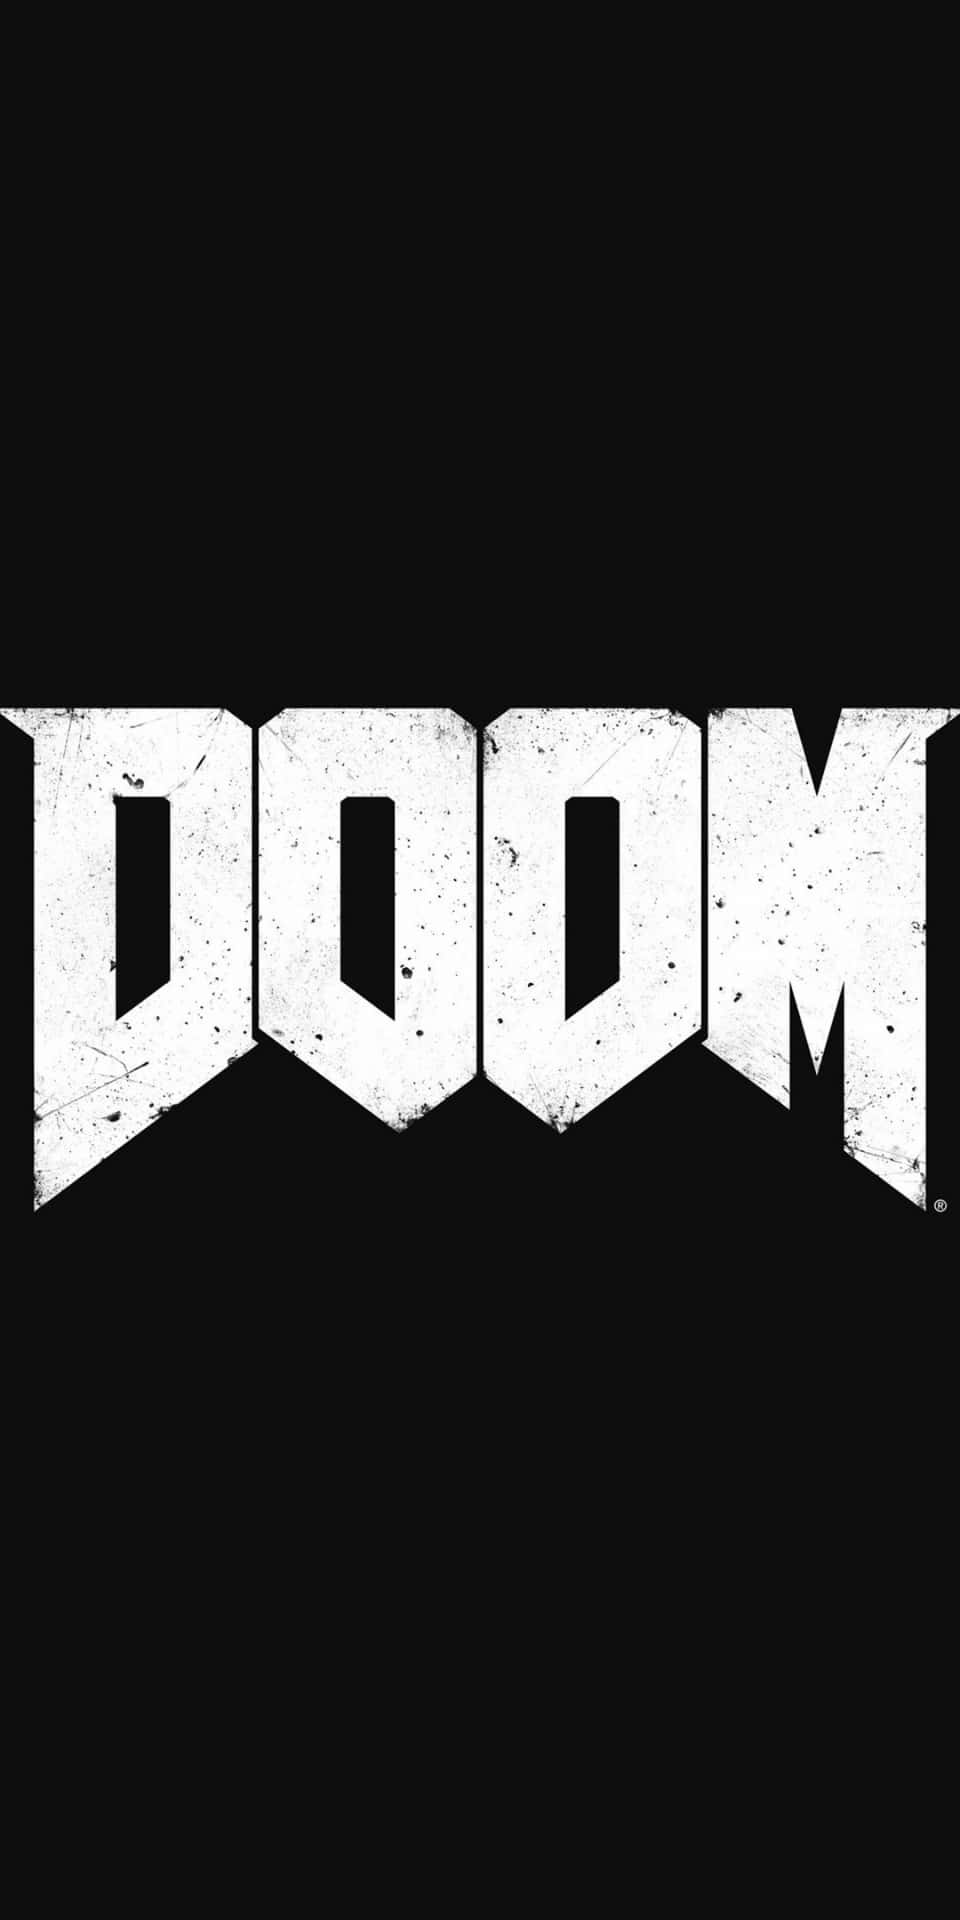 Experience a thrilling gaming performance with Pixel 3 Doom